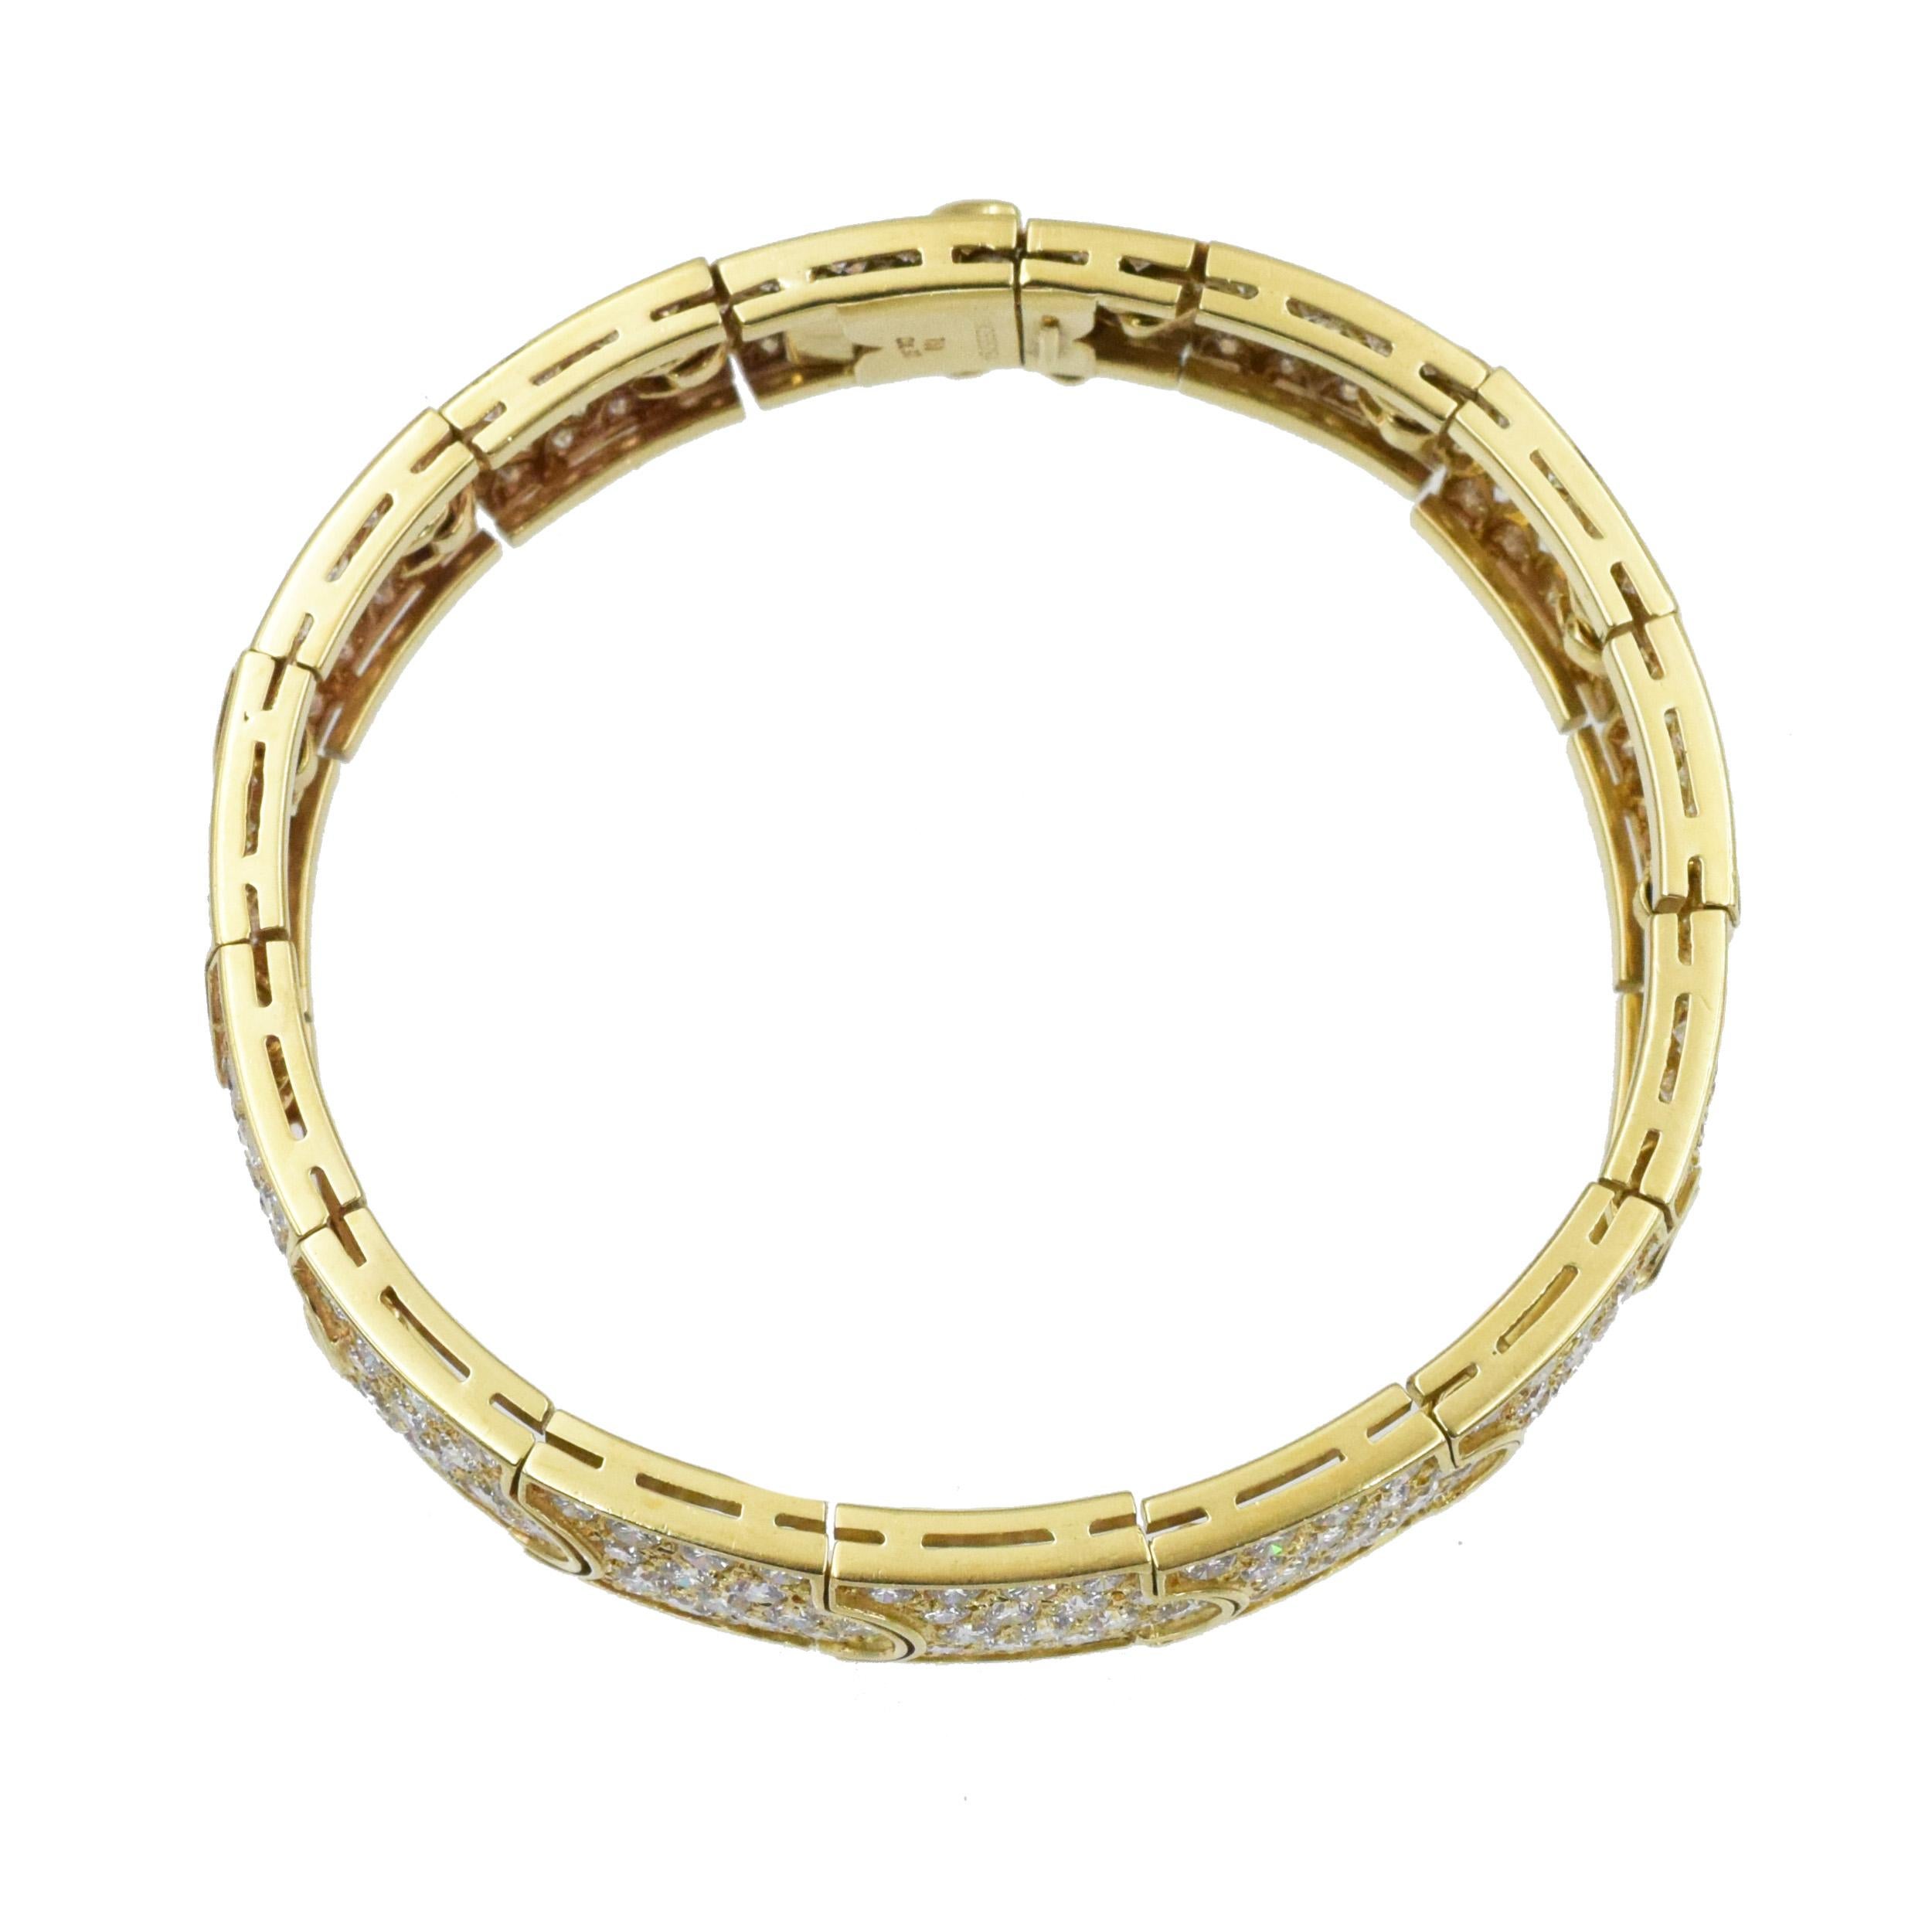 Gold and Diamond Bracelet T In Excellent Condition For Sale In New York, NY